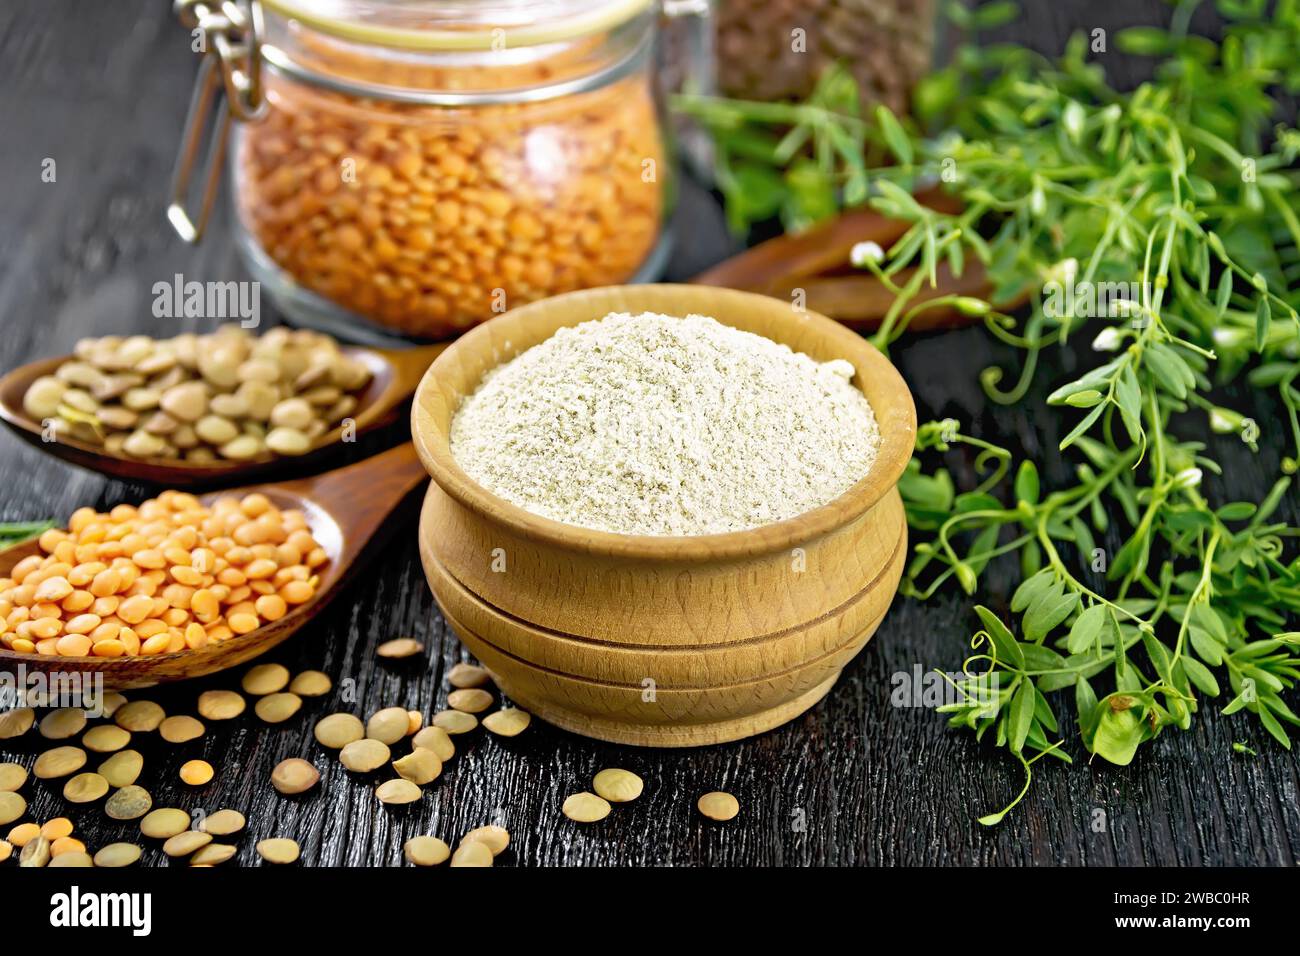 Lentil flour in a bowl, red and brown lentils in spoons and glass jars, bean stalks with leaves on background of black wooden board Stock Photo